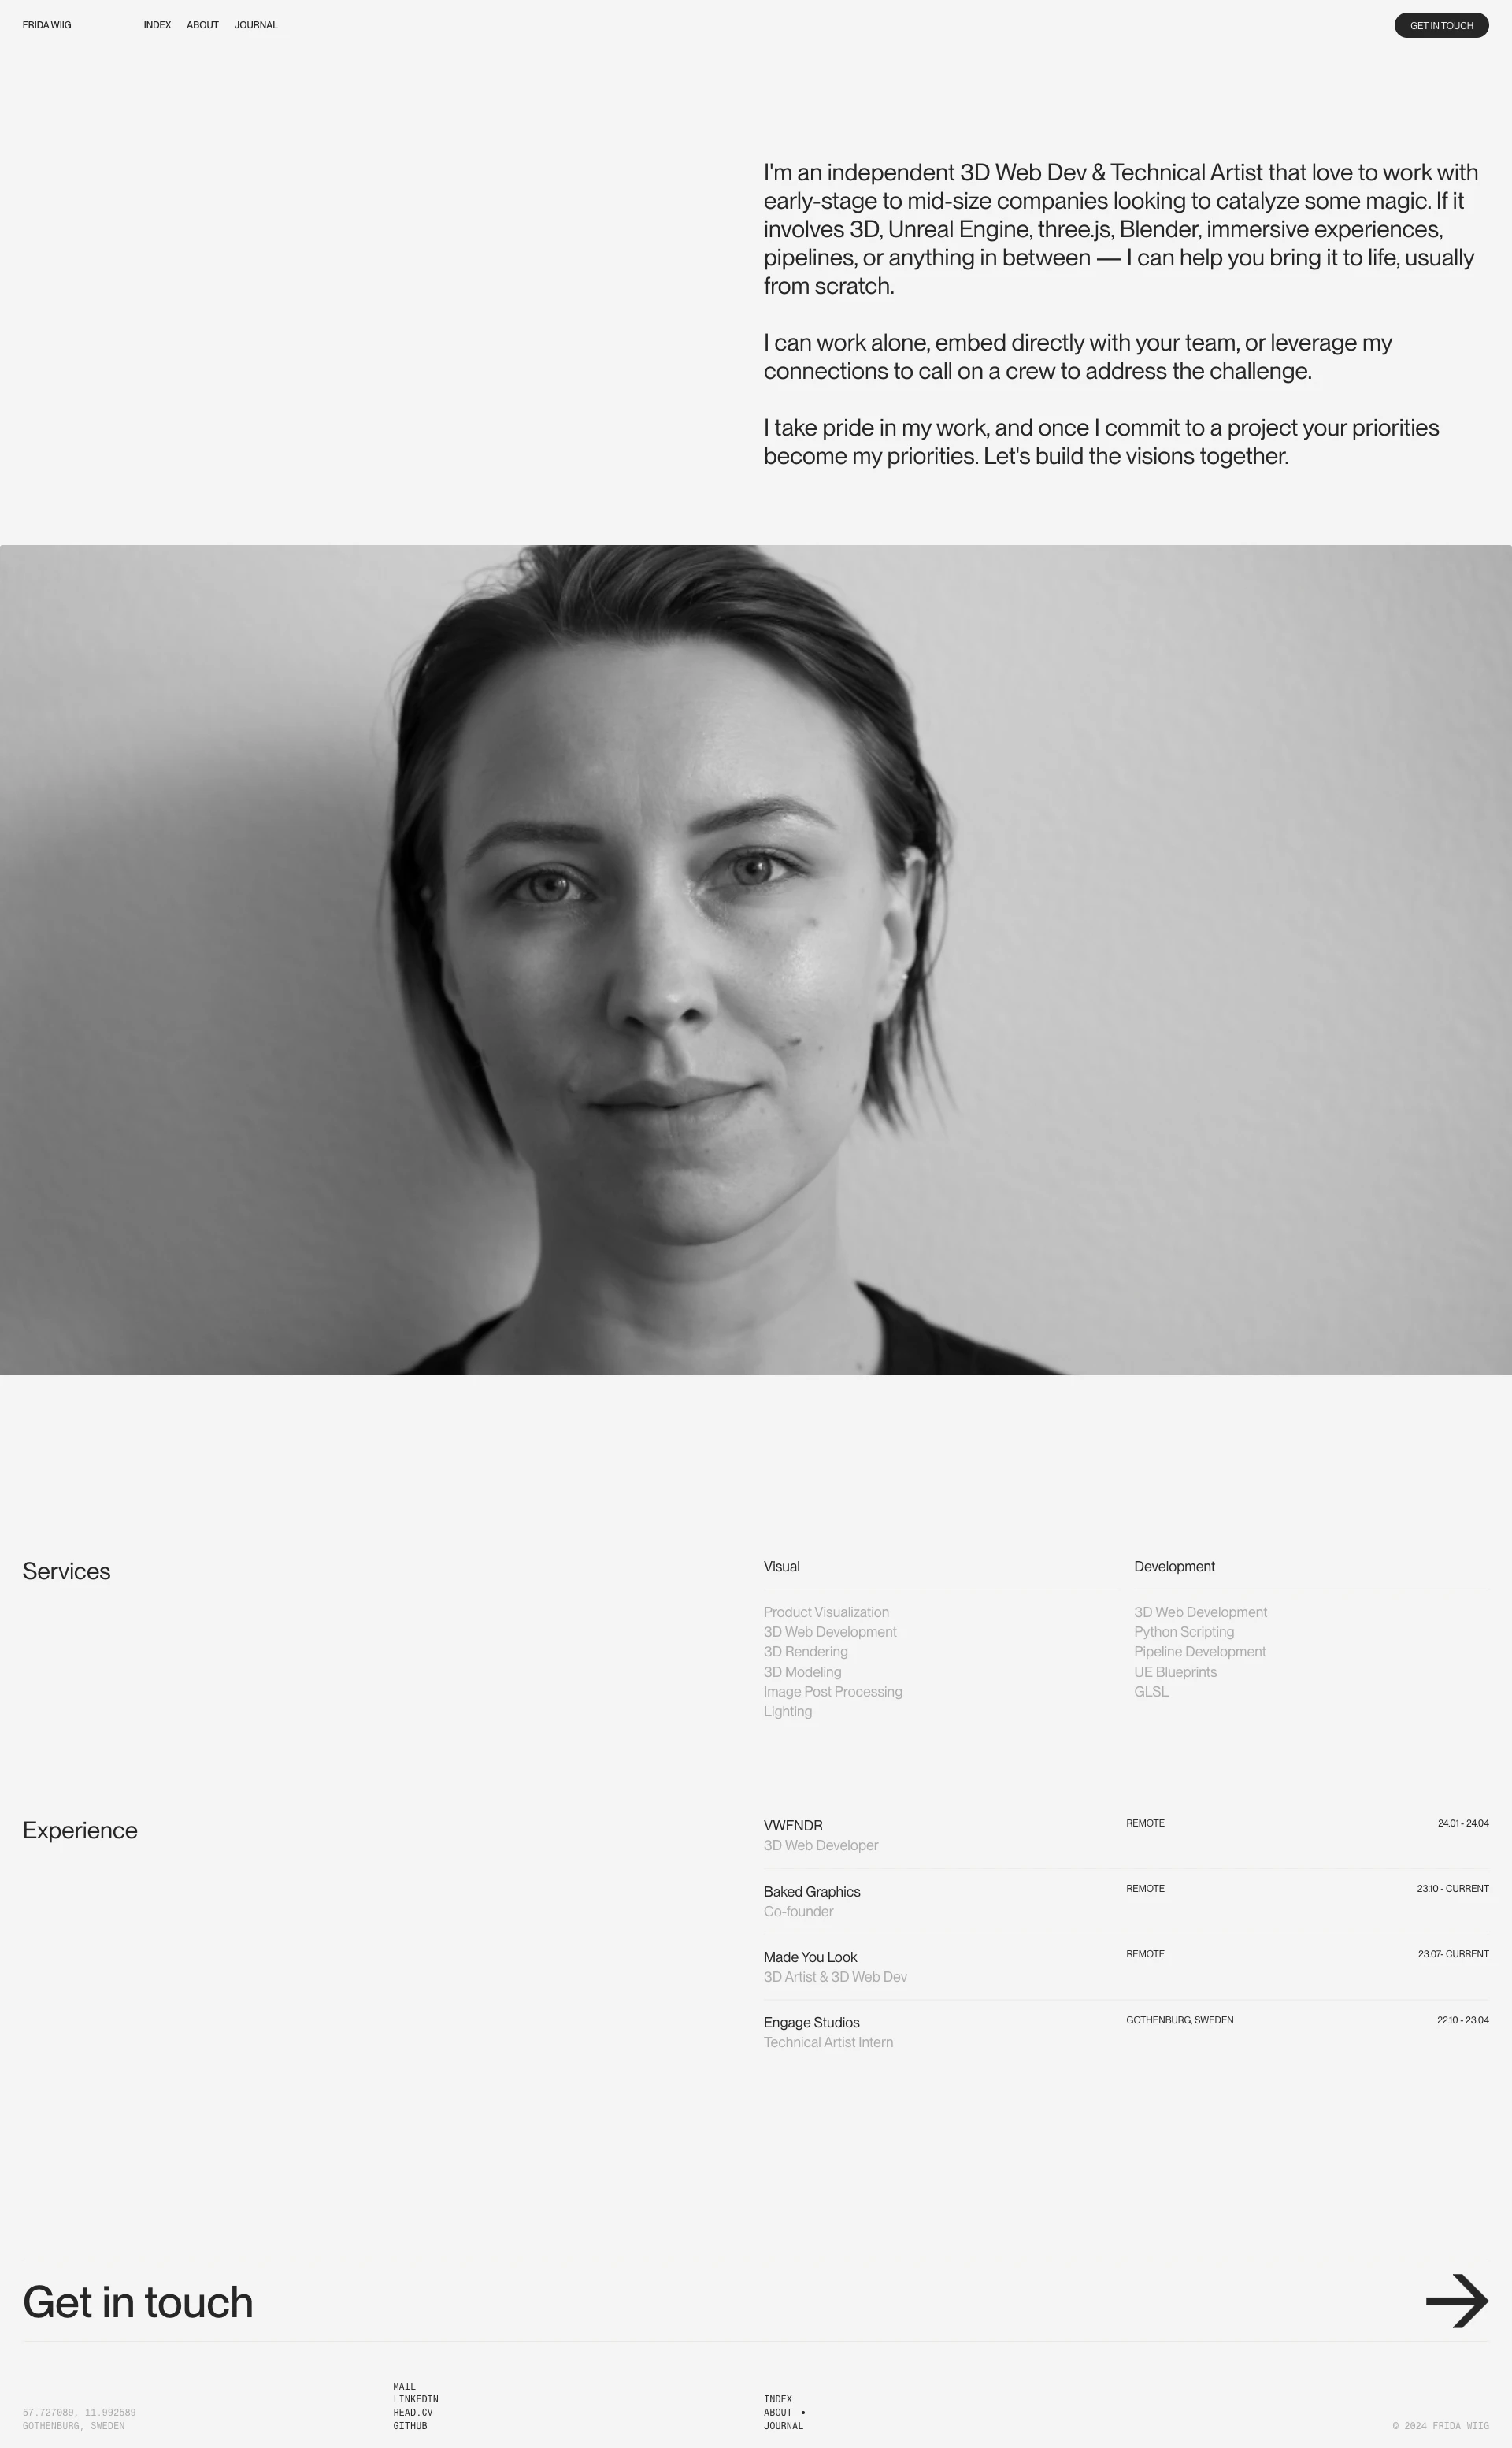 Frida Wiig Landing Page Example: I'm an independent 3D Web Dev & Technical Artist that love to work with early-stage to mid-size companies looking to catalyze some magic. If it involves 3D, Unreal Engine, three.js, Blender, immersive experiences, pipelines, or anything in between — I can help you bring it to life, usually from scratch.